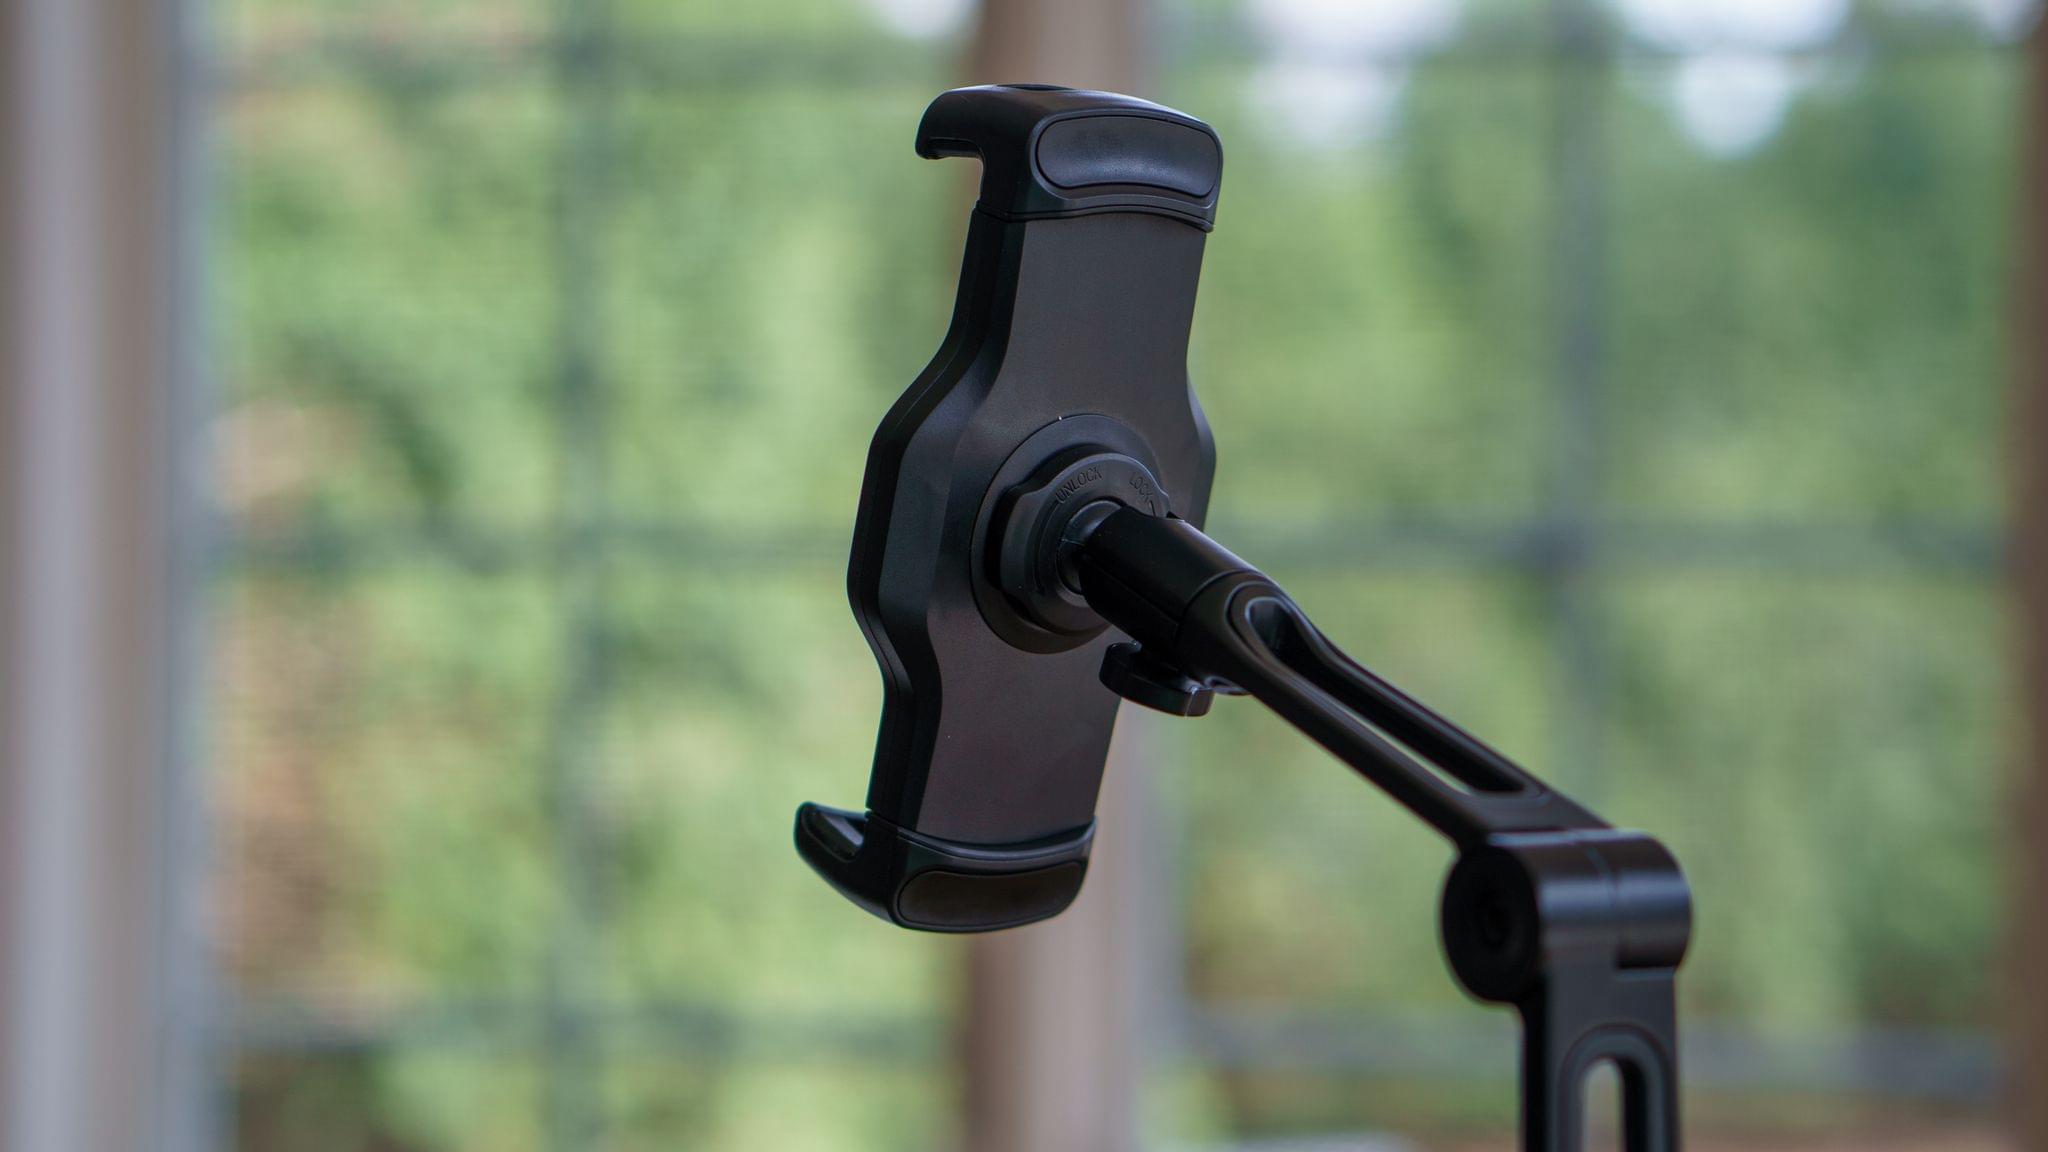 The HoverBar Duo features a grippy, secure clamp for your iPad.